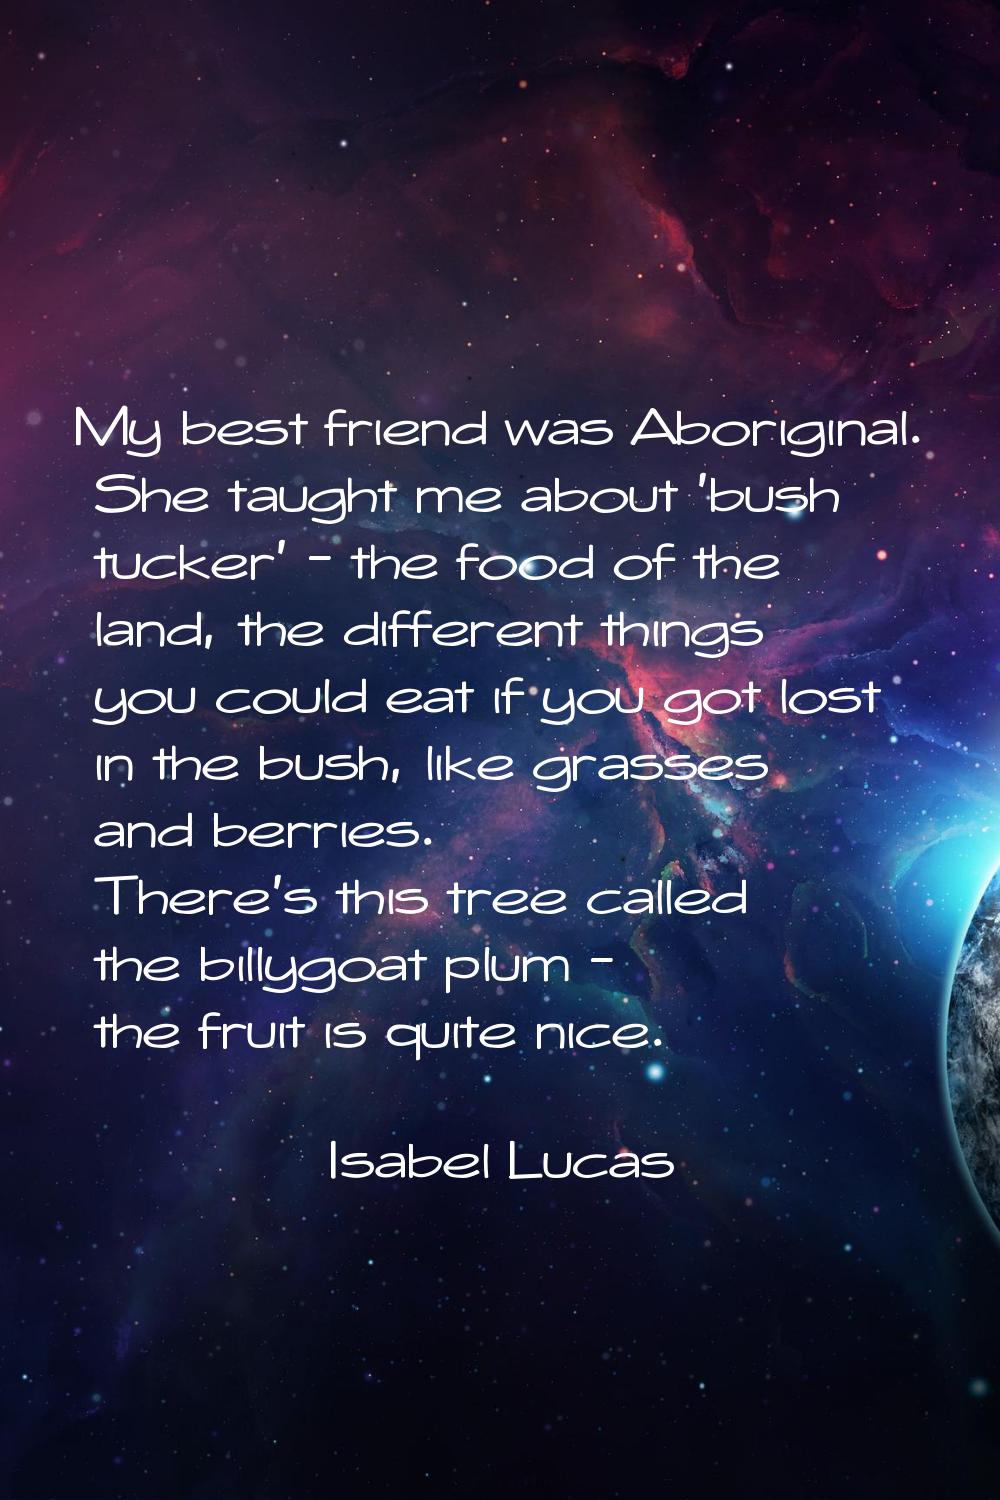 My best friend was Aboriginal. She taught me about 'bush tucker' - the food of the land, the differ